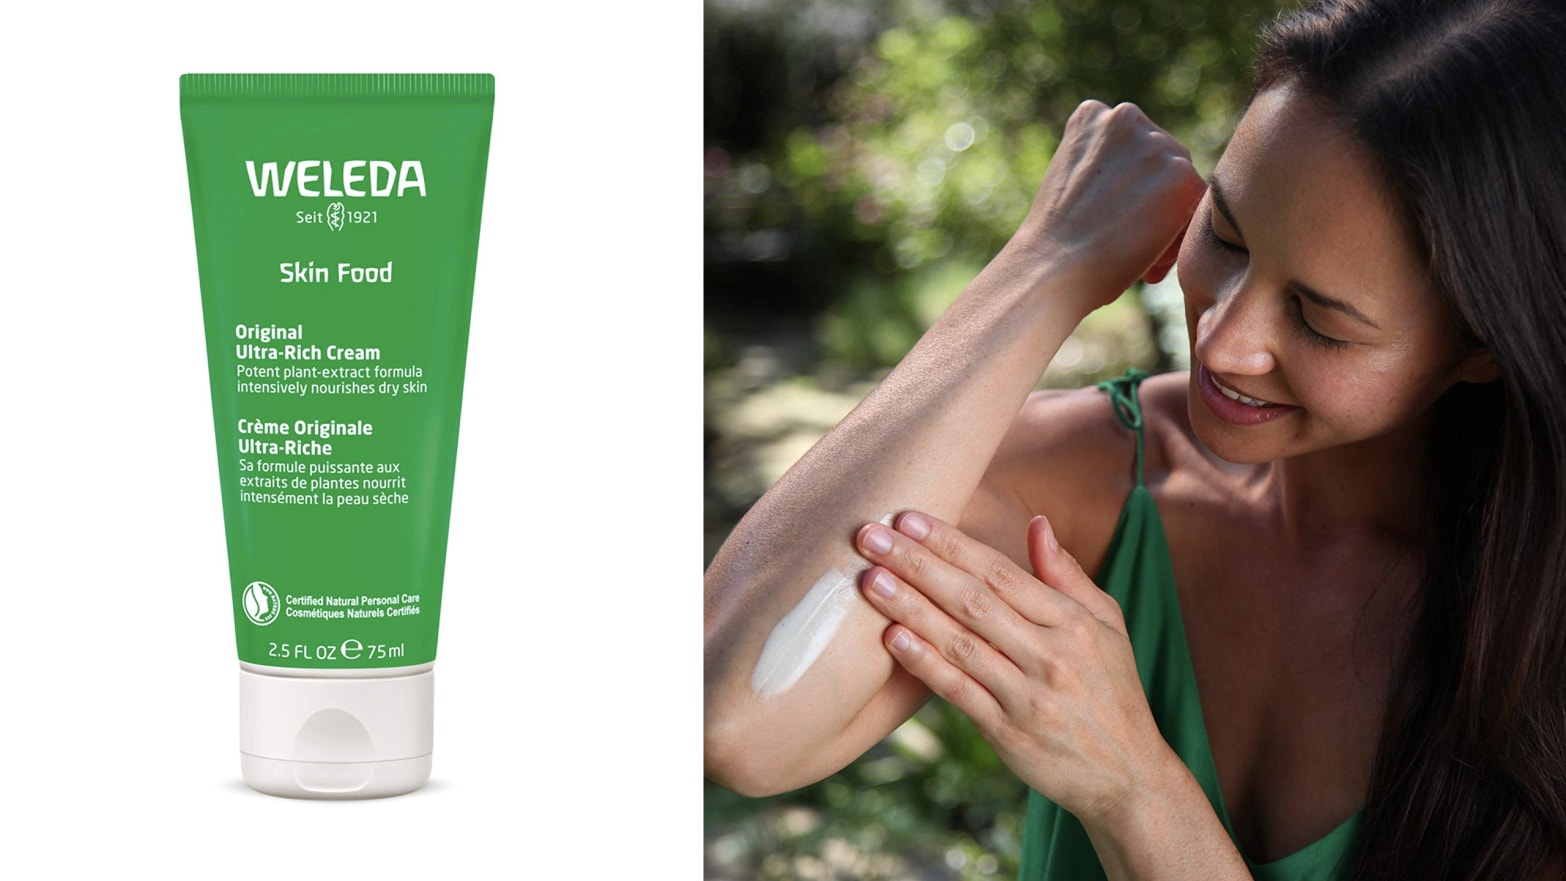 A Moisturizer That Does More Than Just Your Face